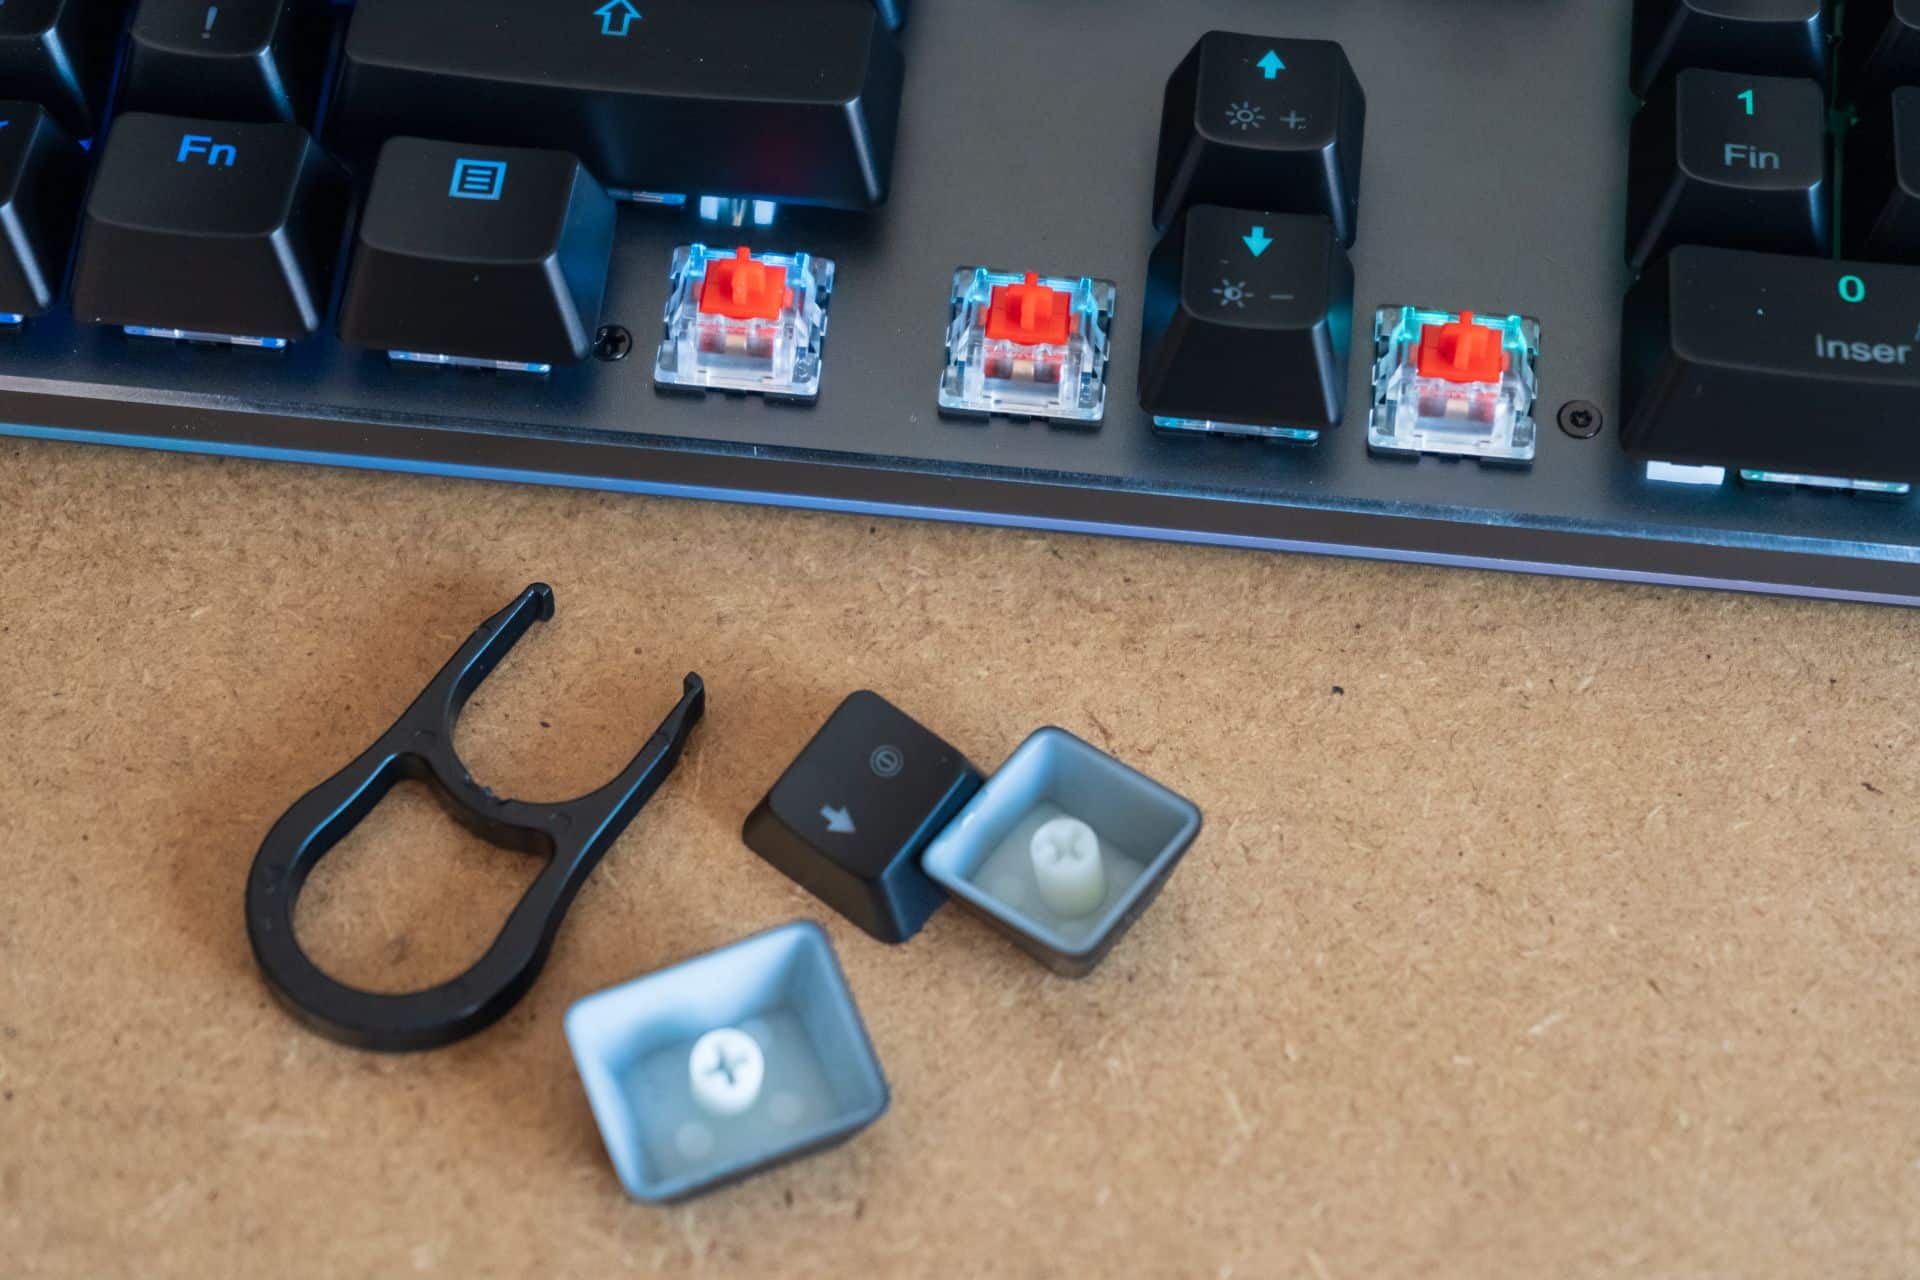 TEST] CLAVIER AUKEY KM-G12 RVB RED SWITCH - Le blog Gaming de Starsystemf